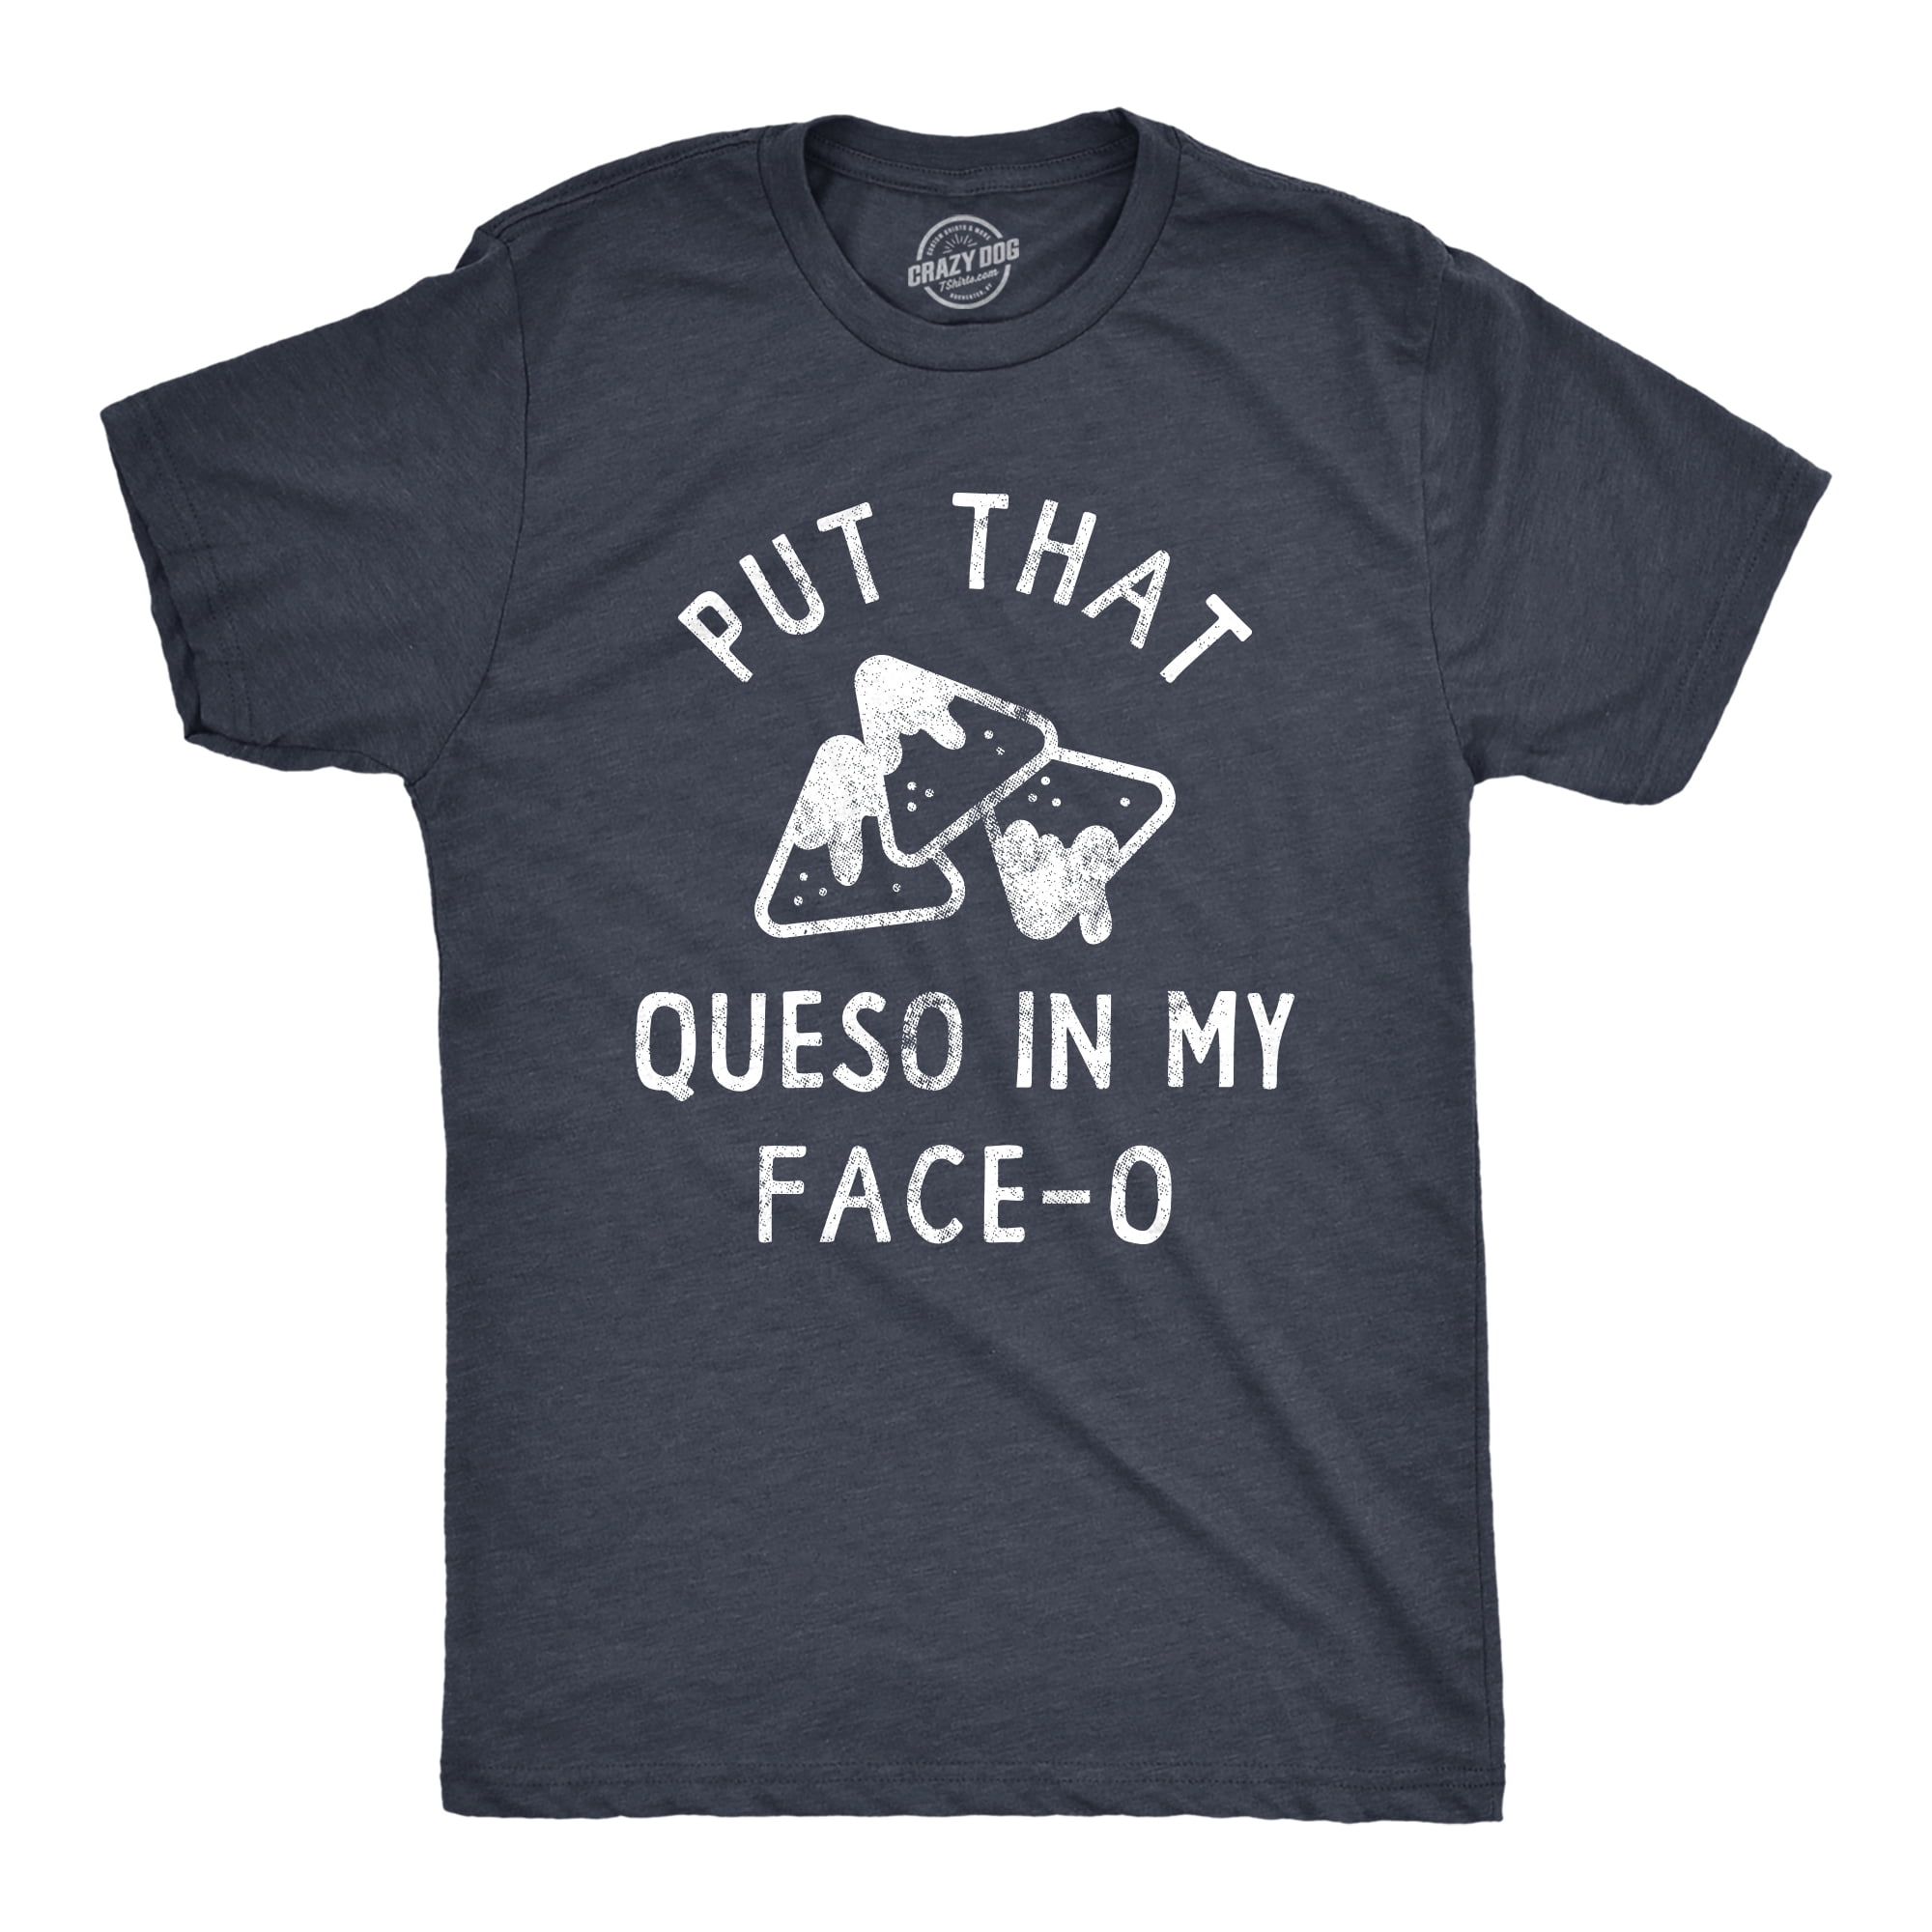 PUT QUESO IN My Face O Unisex Cotton T-Shirt Tee Shirt 